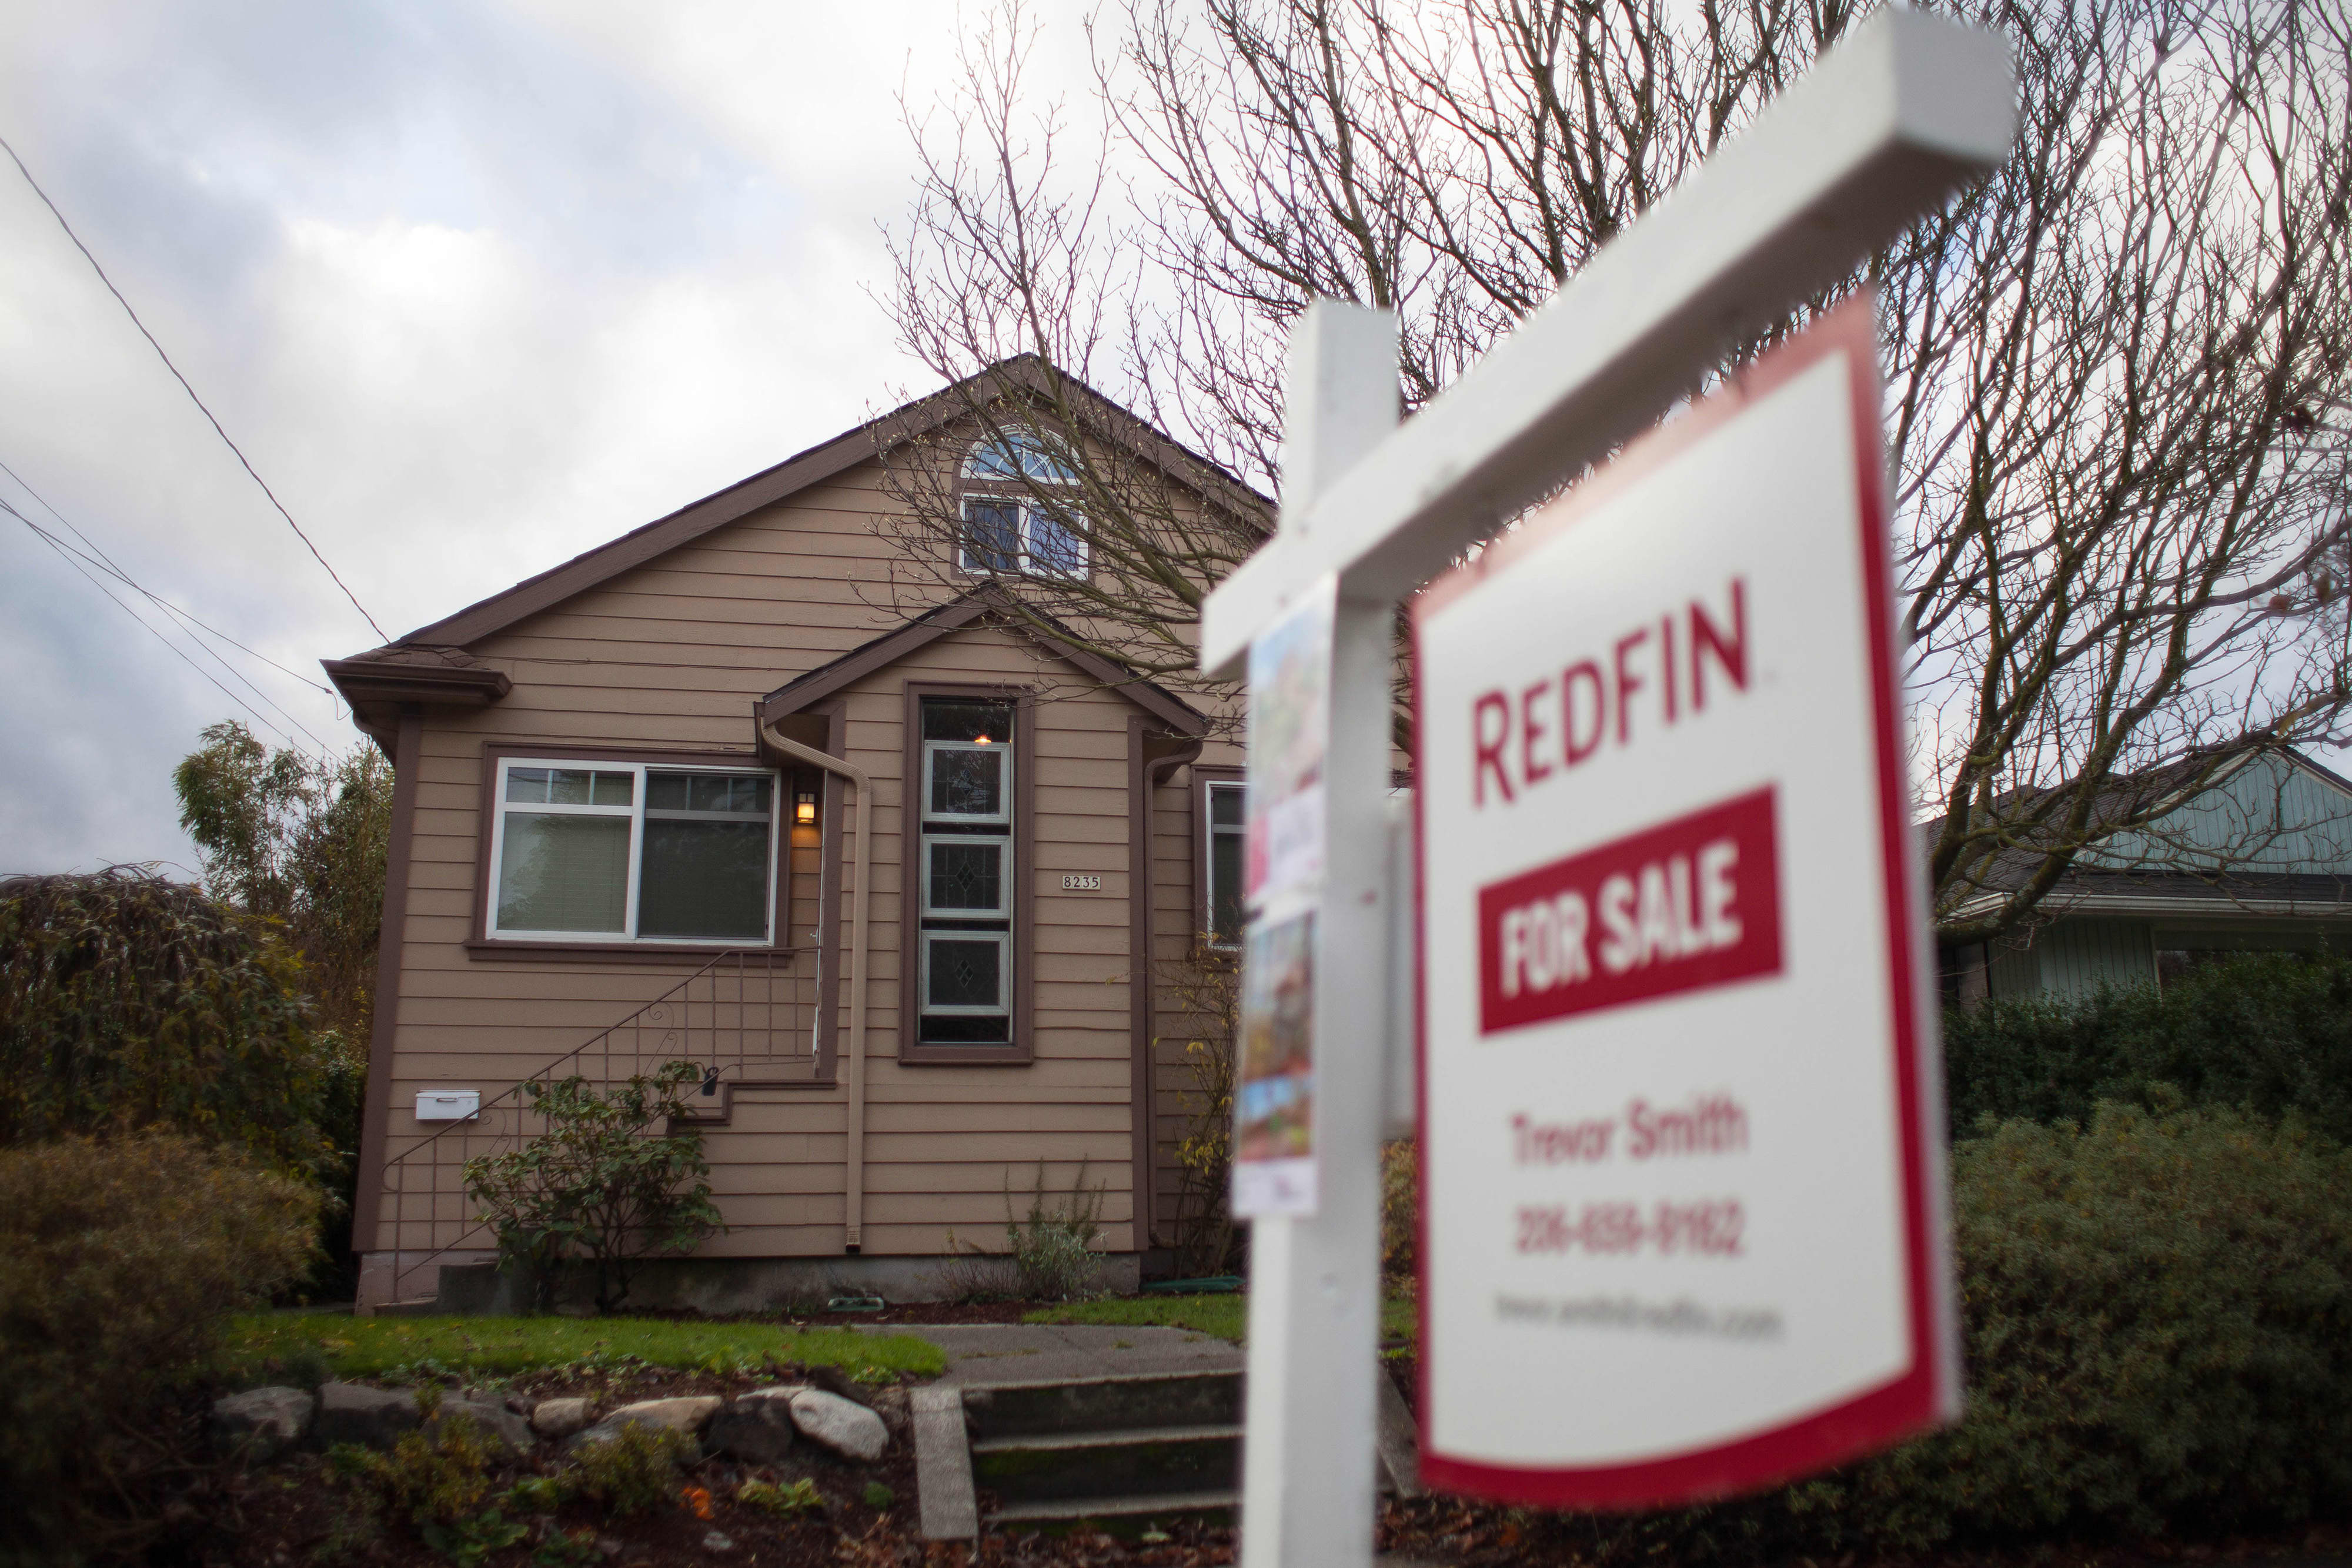 Real estate firms Compass and Redfin announce layoffs as housing market slows